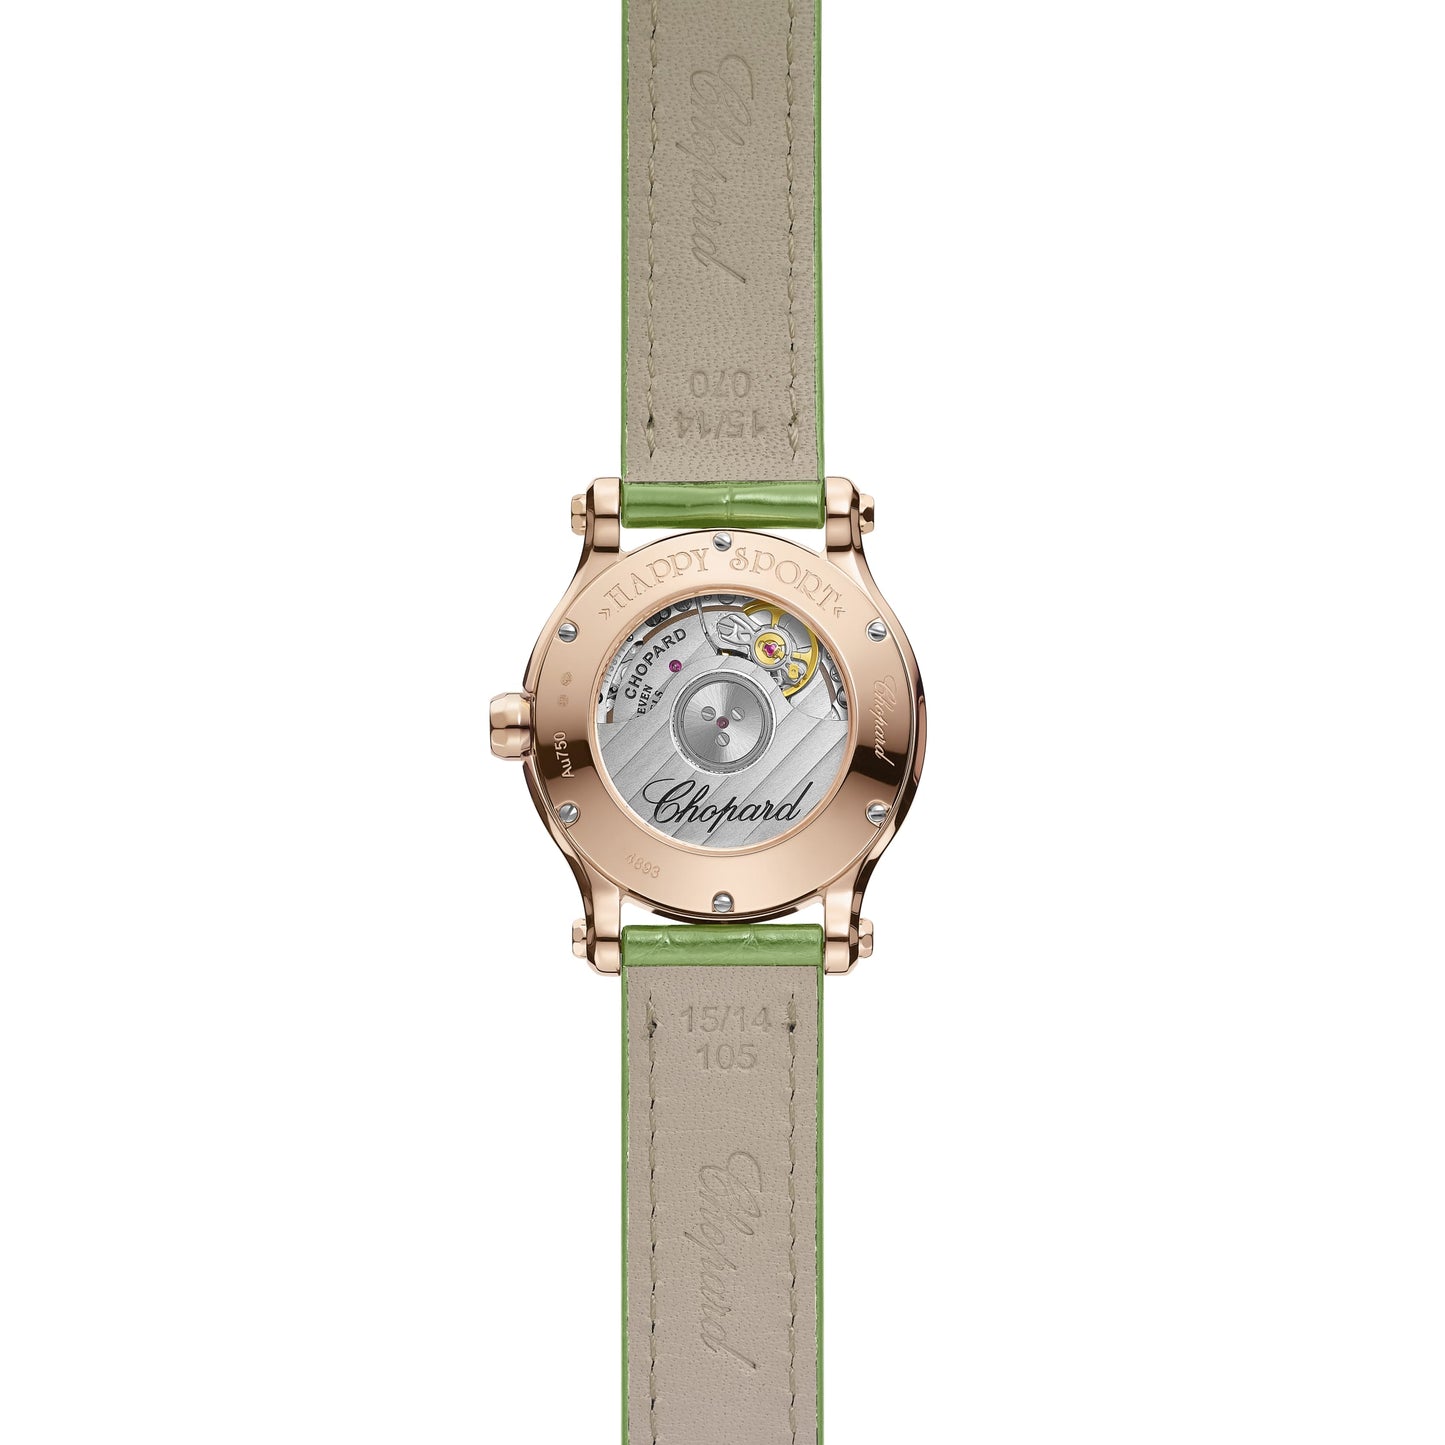 HAPPY SPORT 30 MM, AUTOMATIC, ETHICAL ROSE GOLD, DIAMONDS 274893-5016